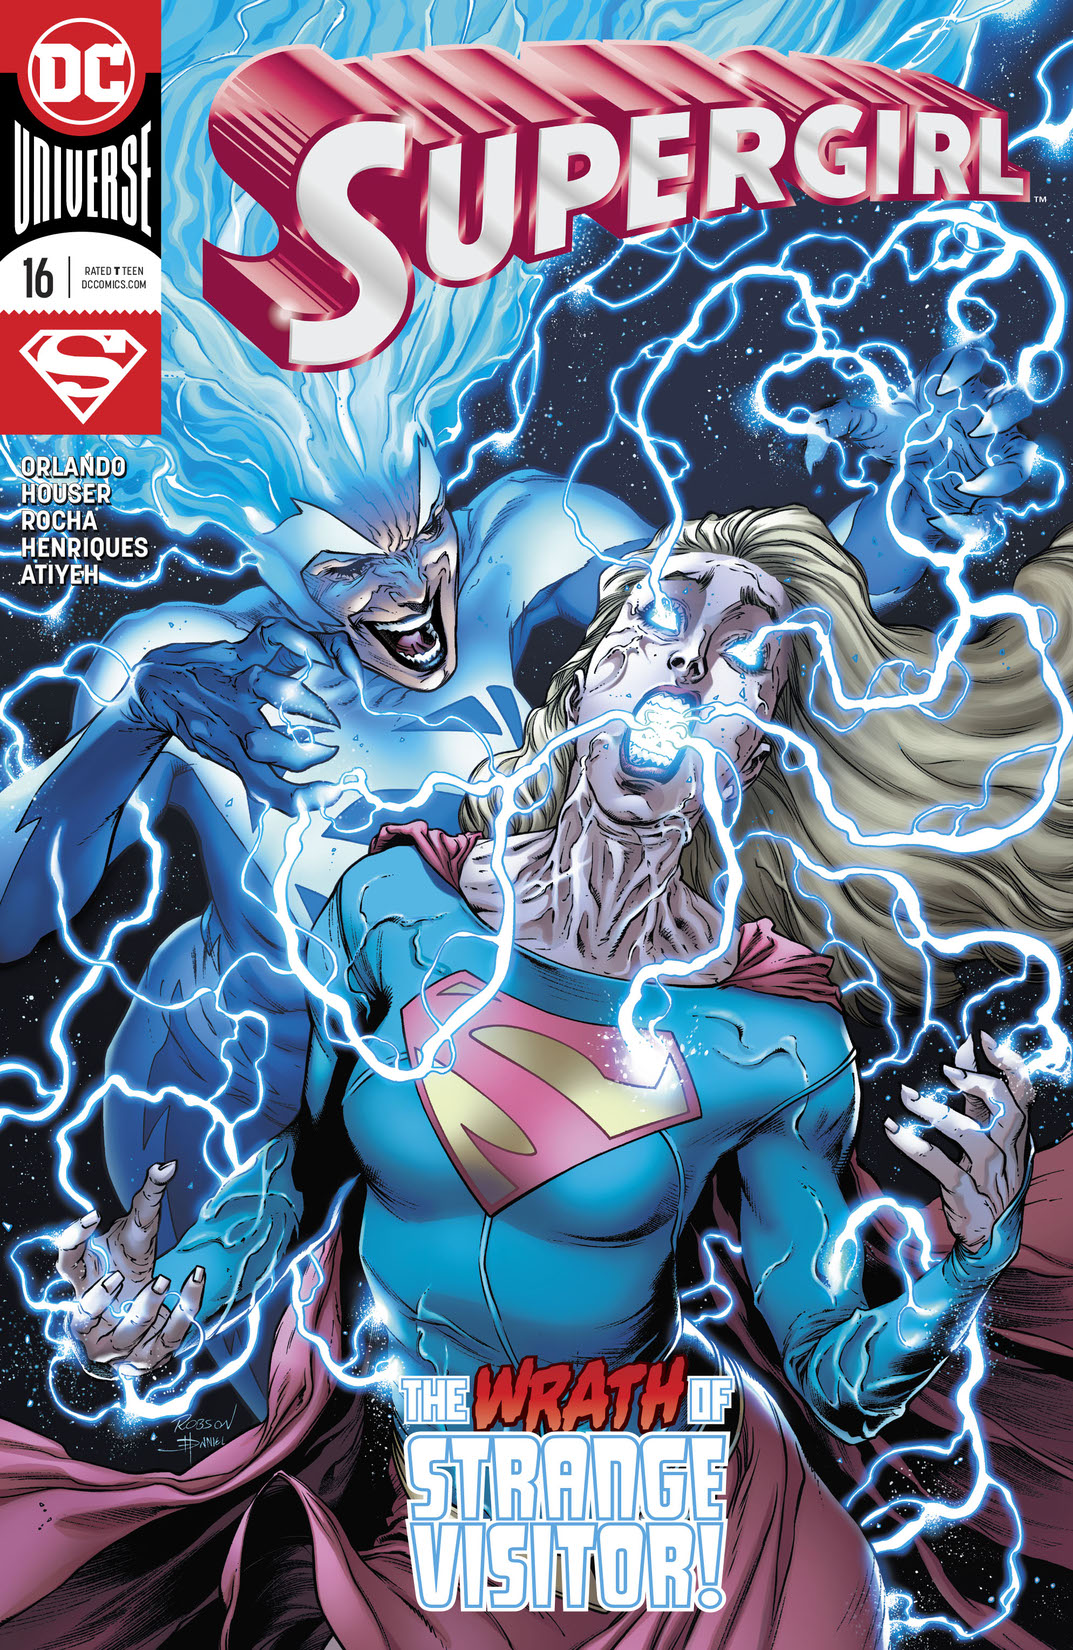 Supergirl (2016-) #16 preview images